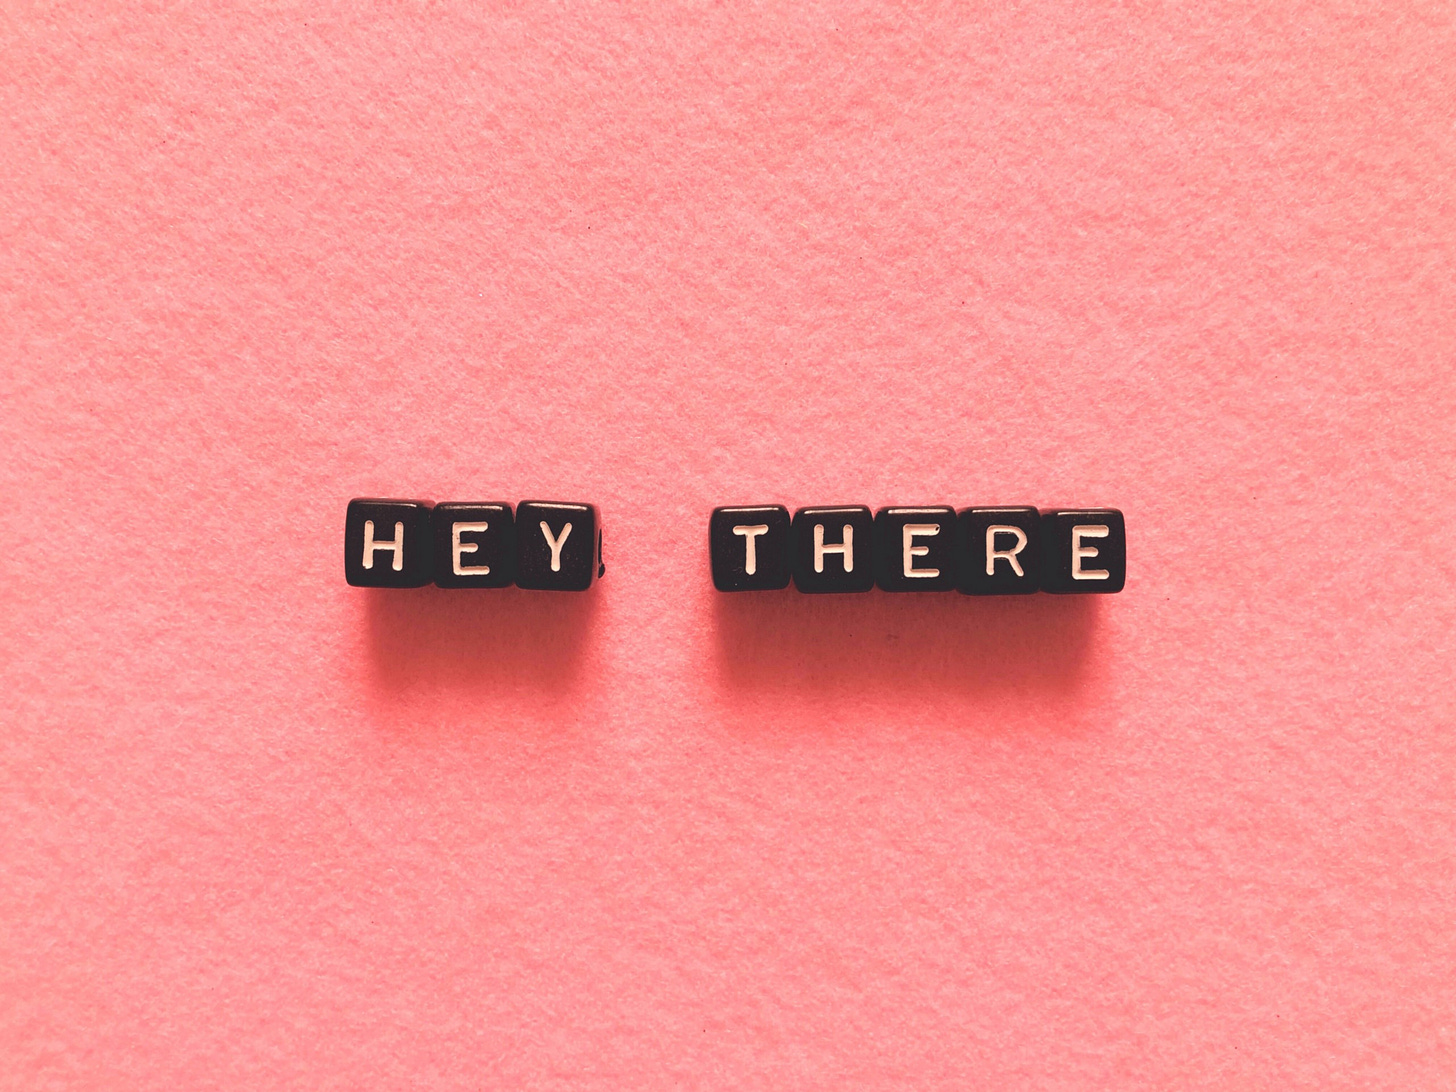 Black letters read, “Hey, there” against a pink background.